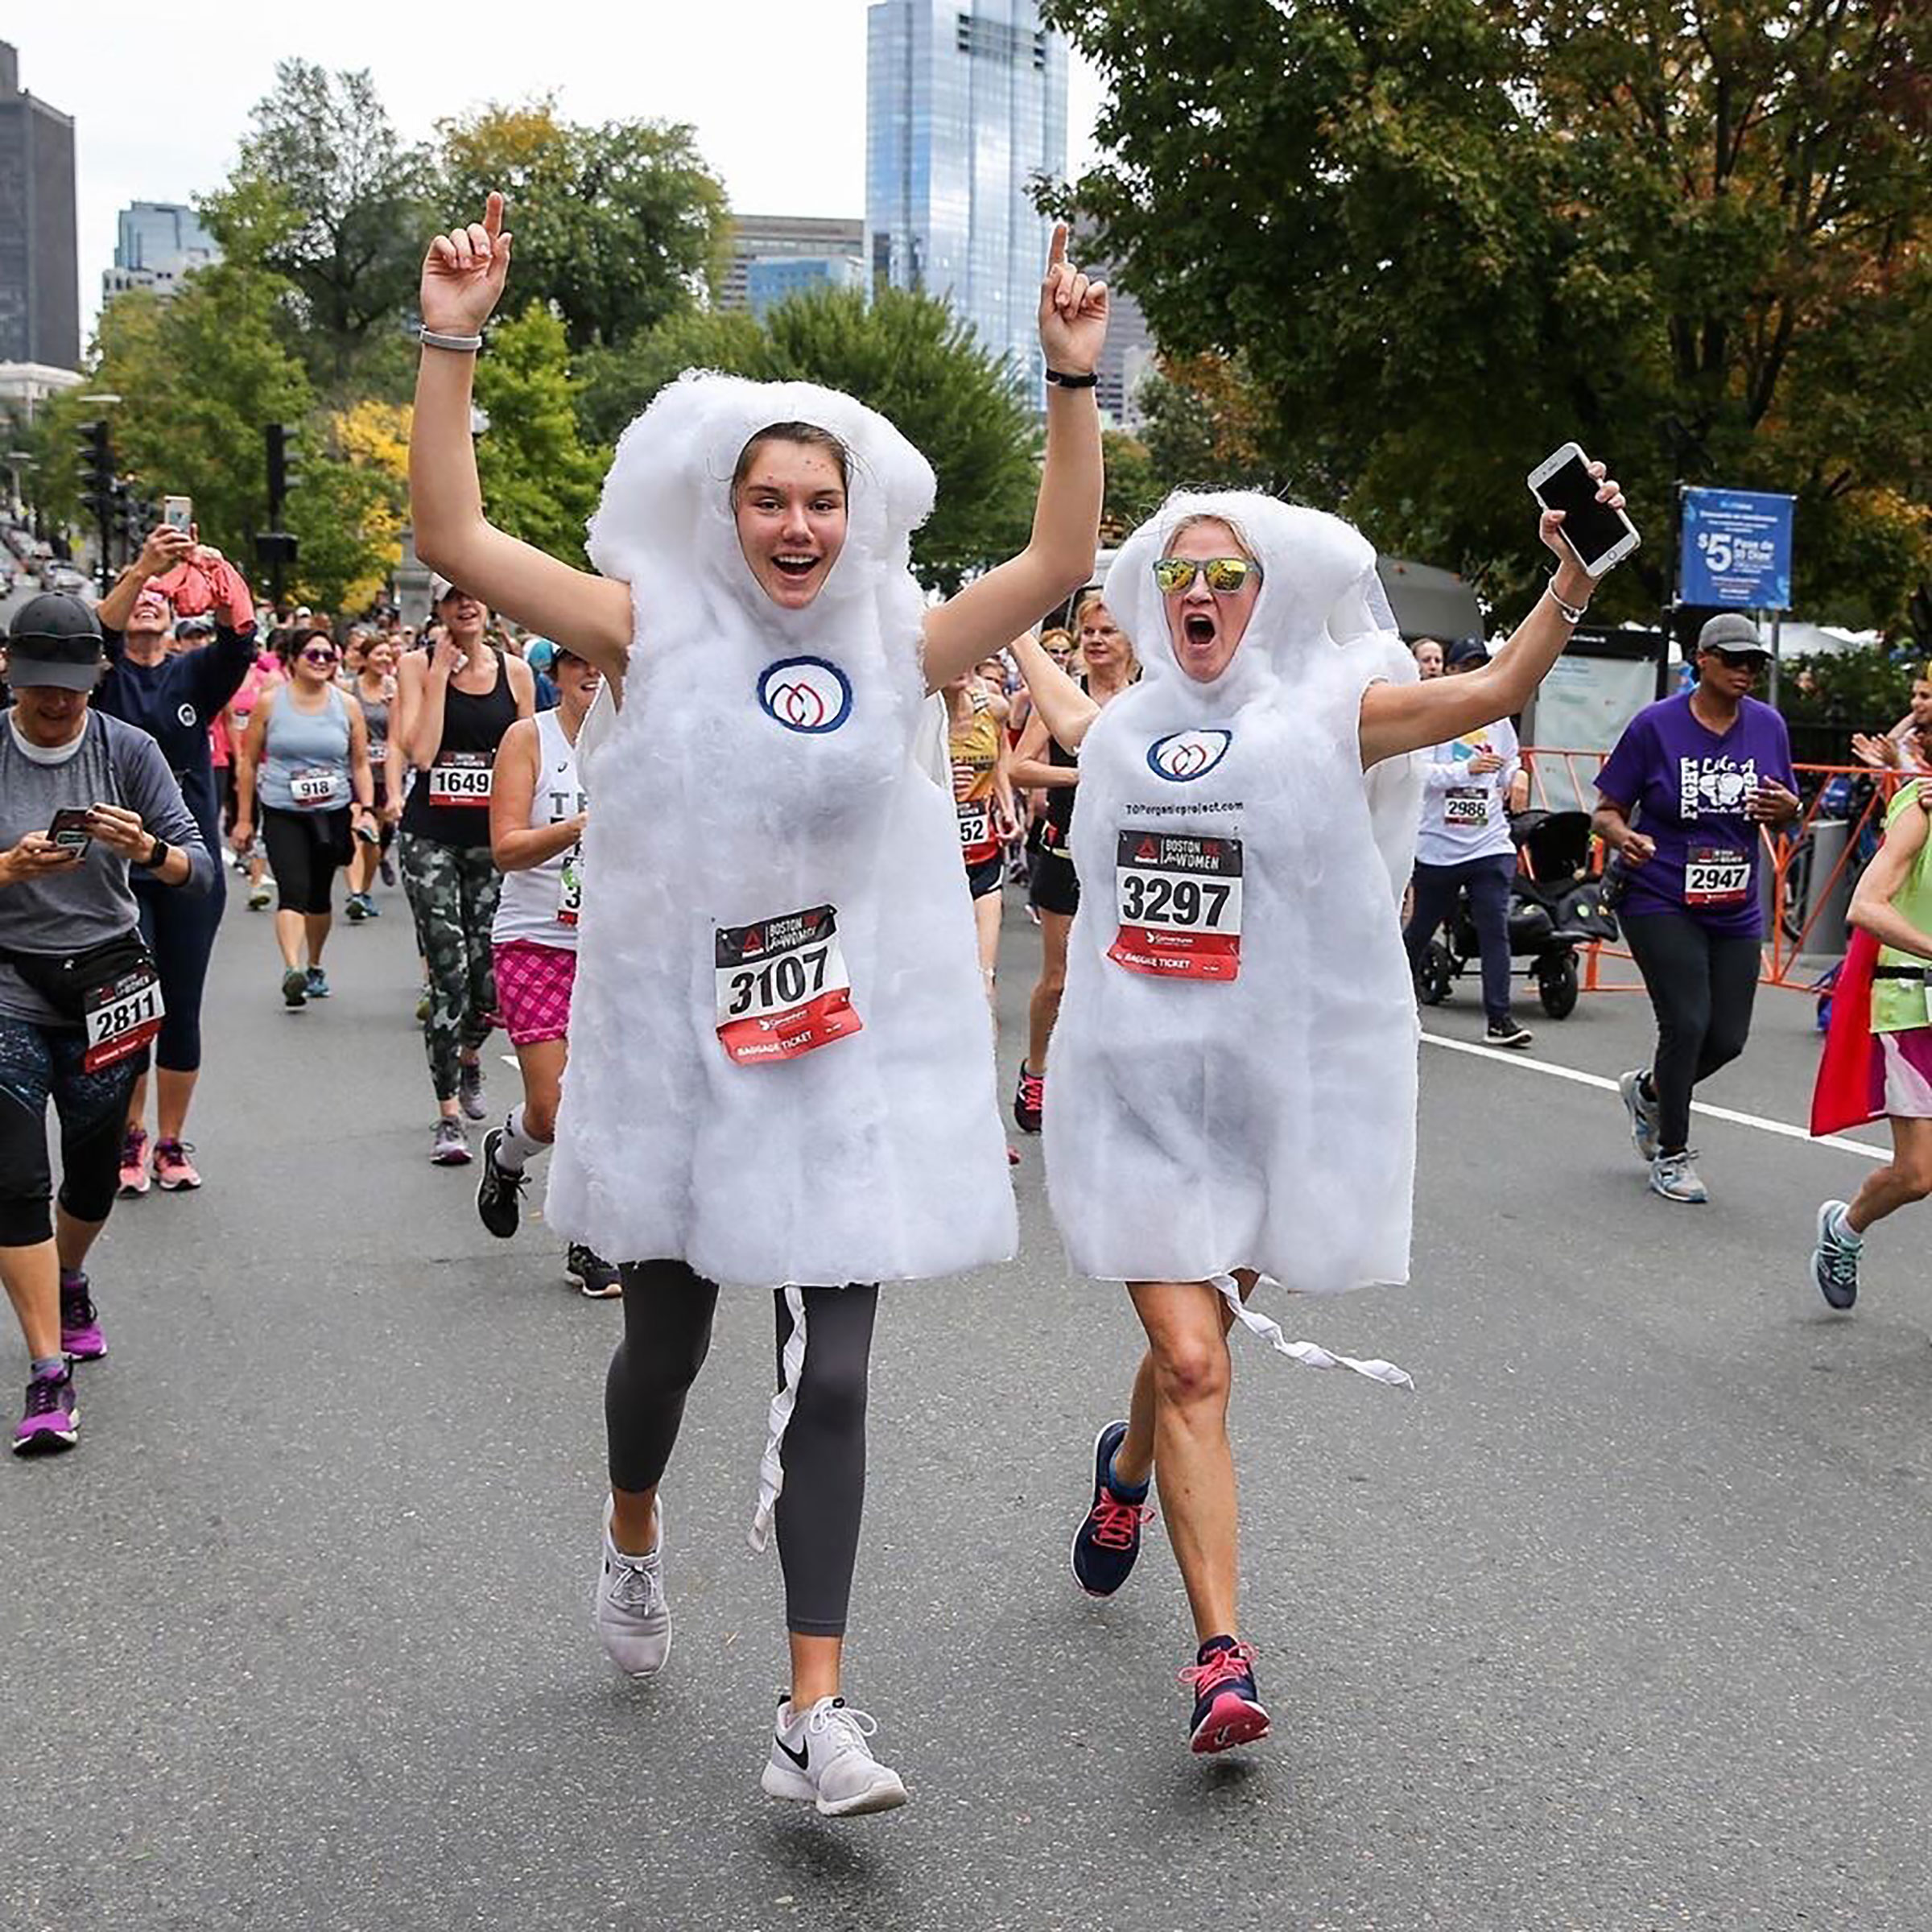 Thyme Sullivan, the co-founder of TOP the organic project, which sells period products, ran the Reebok 10k in Boston dressed as a tampon. (Courtesy Thyme Sullivan)